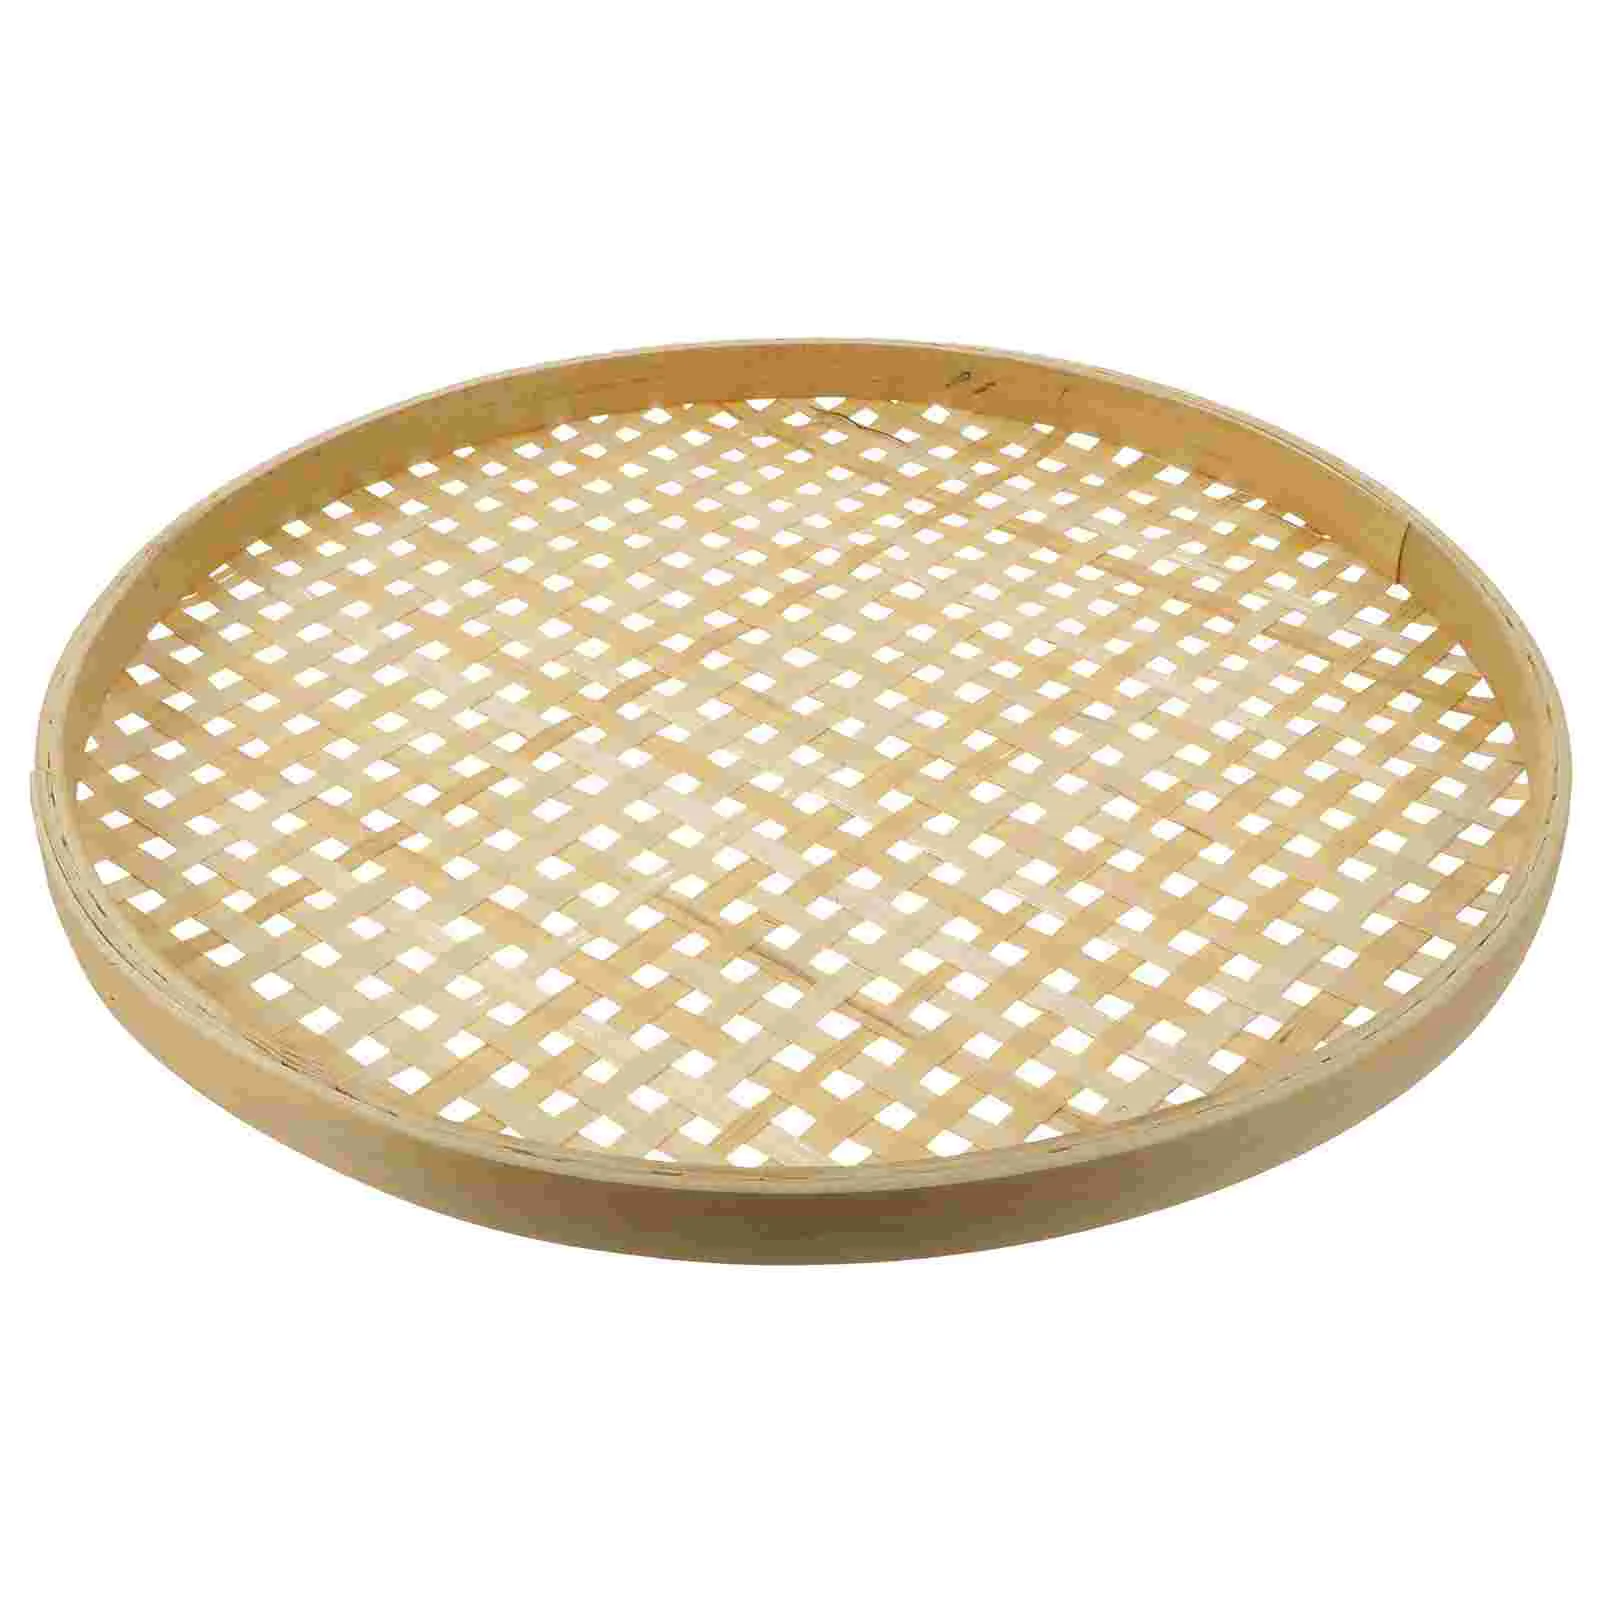 

Basket Tray Fruit Serving Bamboo Woven Baskets Wicker Storage Flat Round Sieve Shallow Food Bread Centerpiece Wall Weaving Bowls